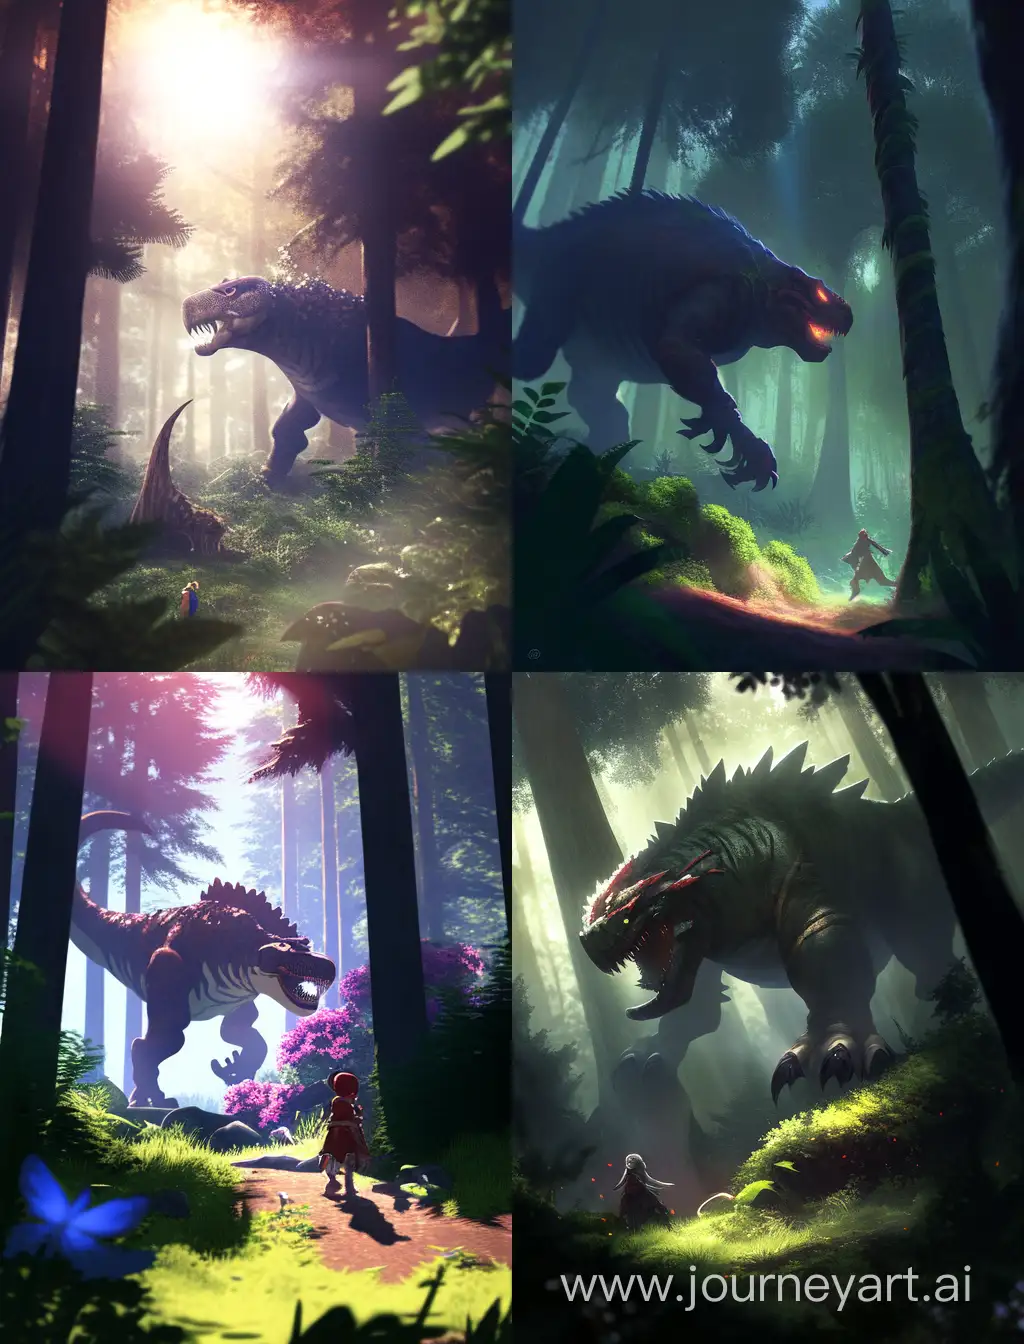 Majestic-Tyrannosaurus-Rex-and-Lion-Encounter-in-Enchanting-Forest